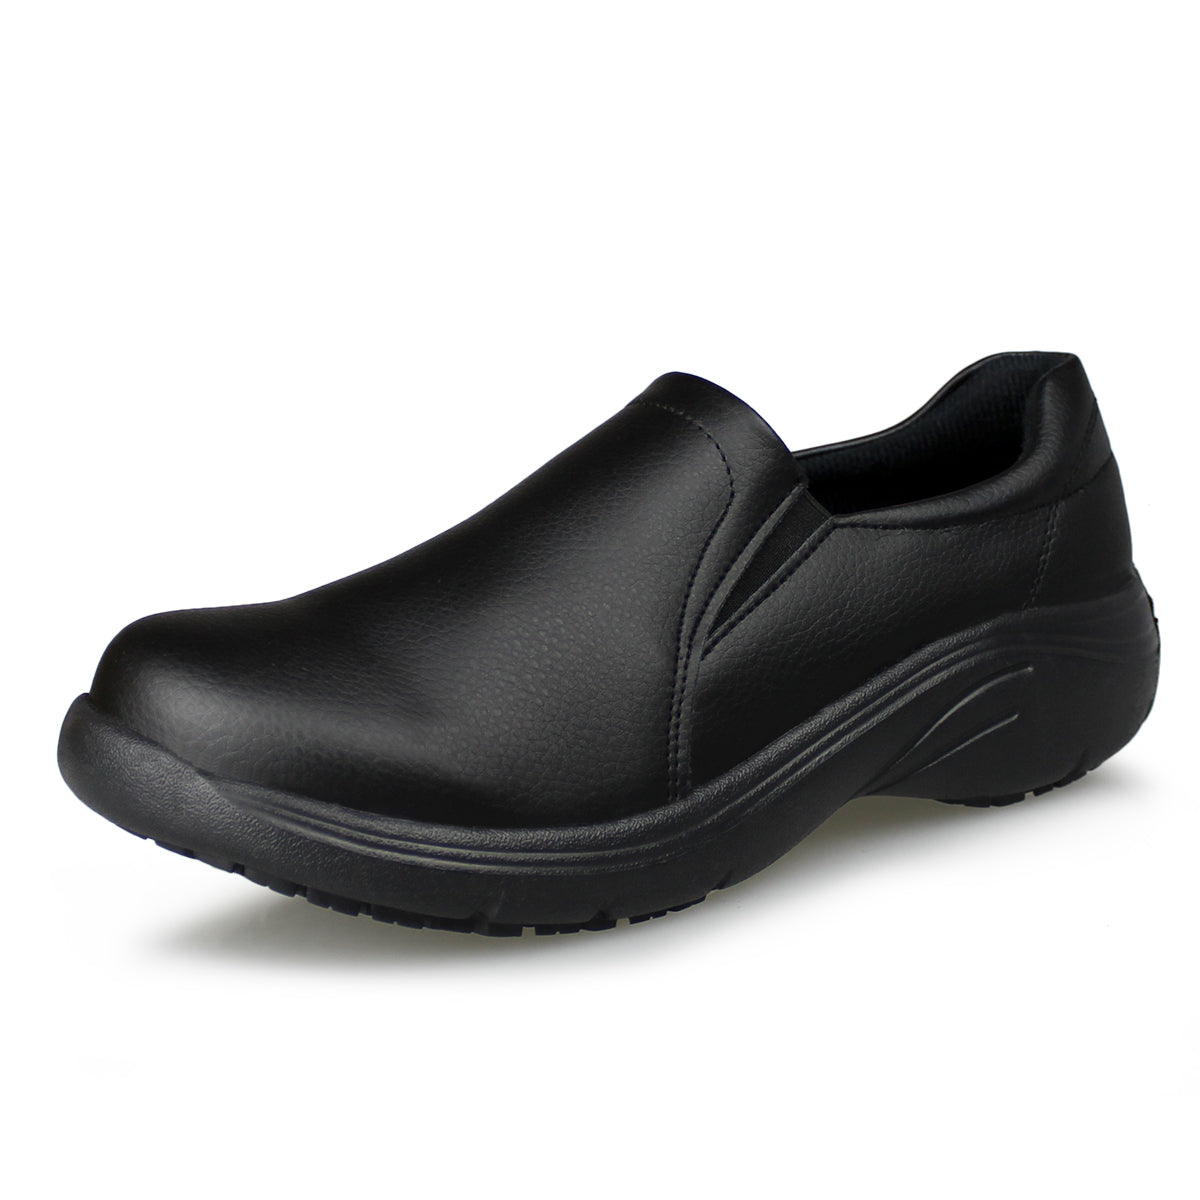 Hawkwell Women’s Slip-Resistant Leather Medical Shoes